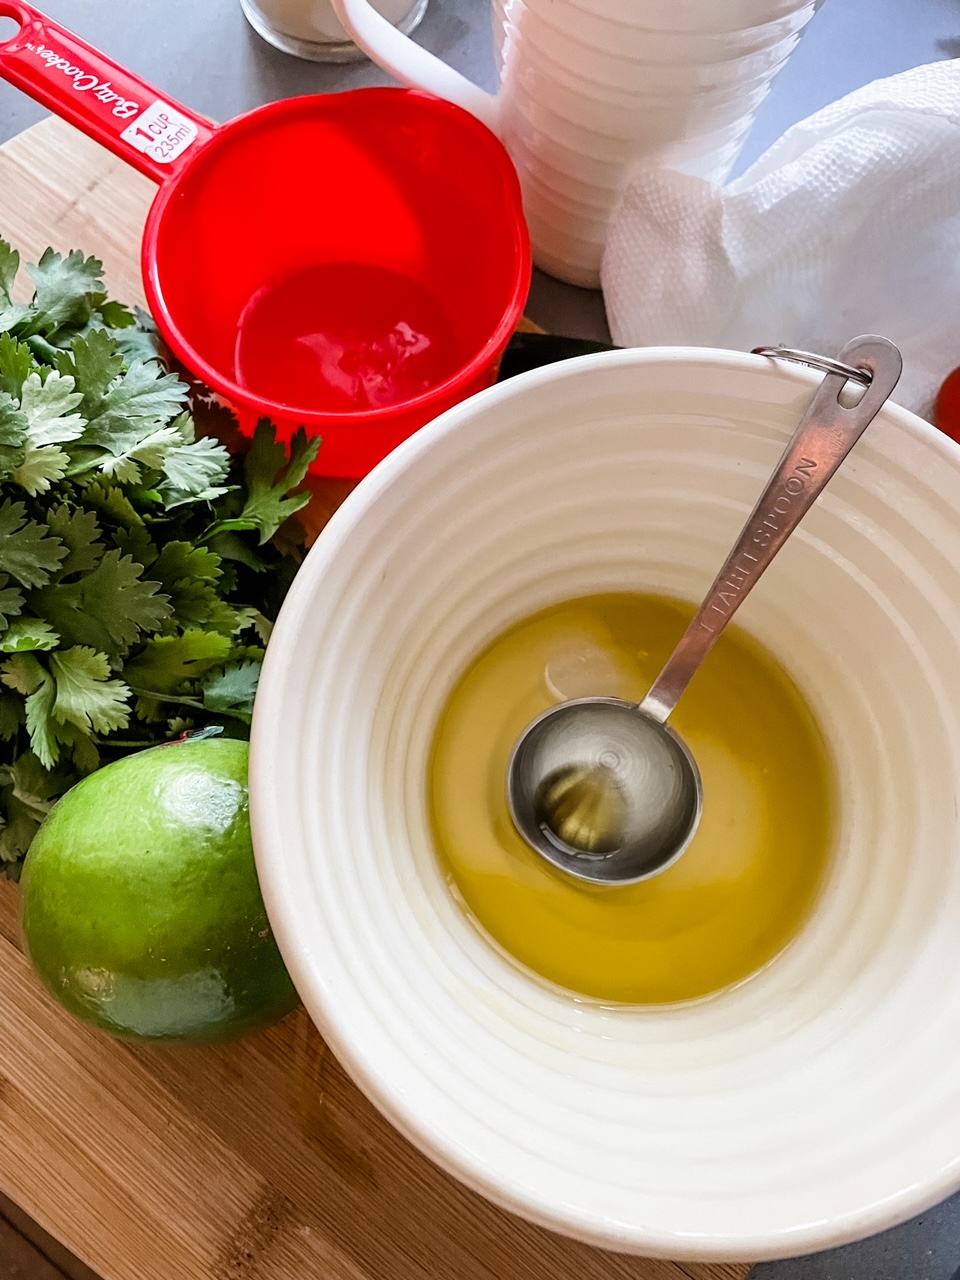 The ingredients for the avocado dressing - cilantro, avocado, and olive oil